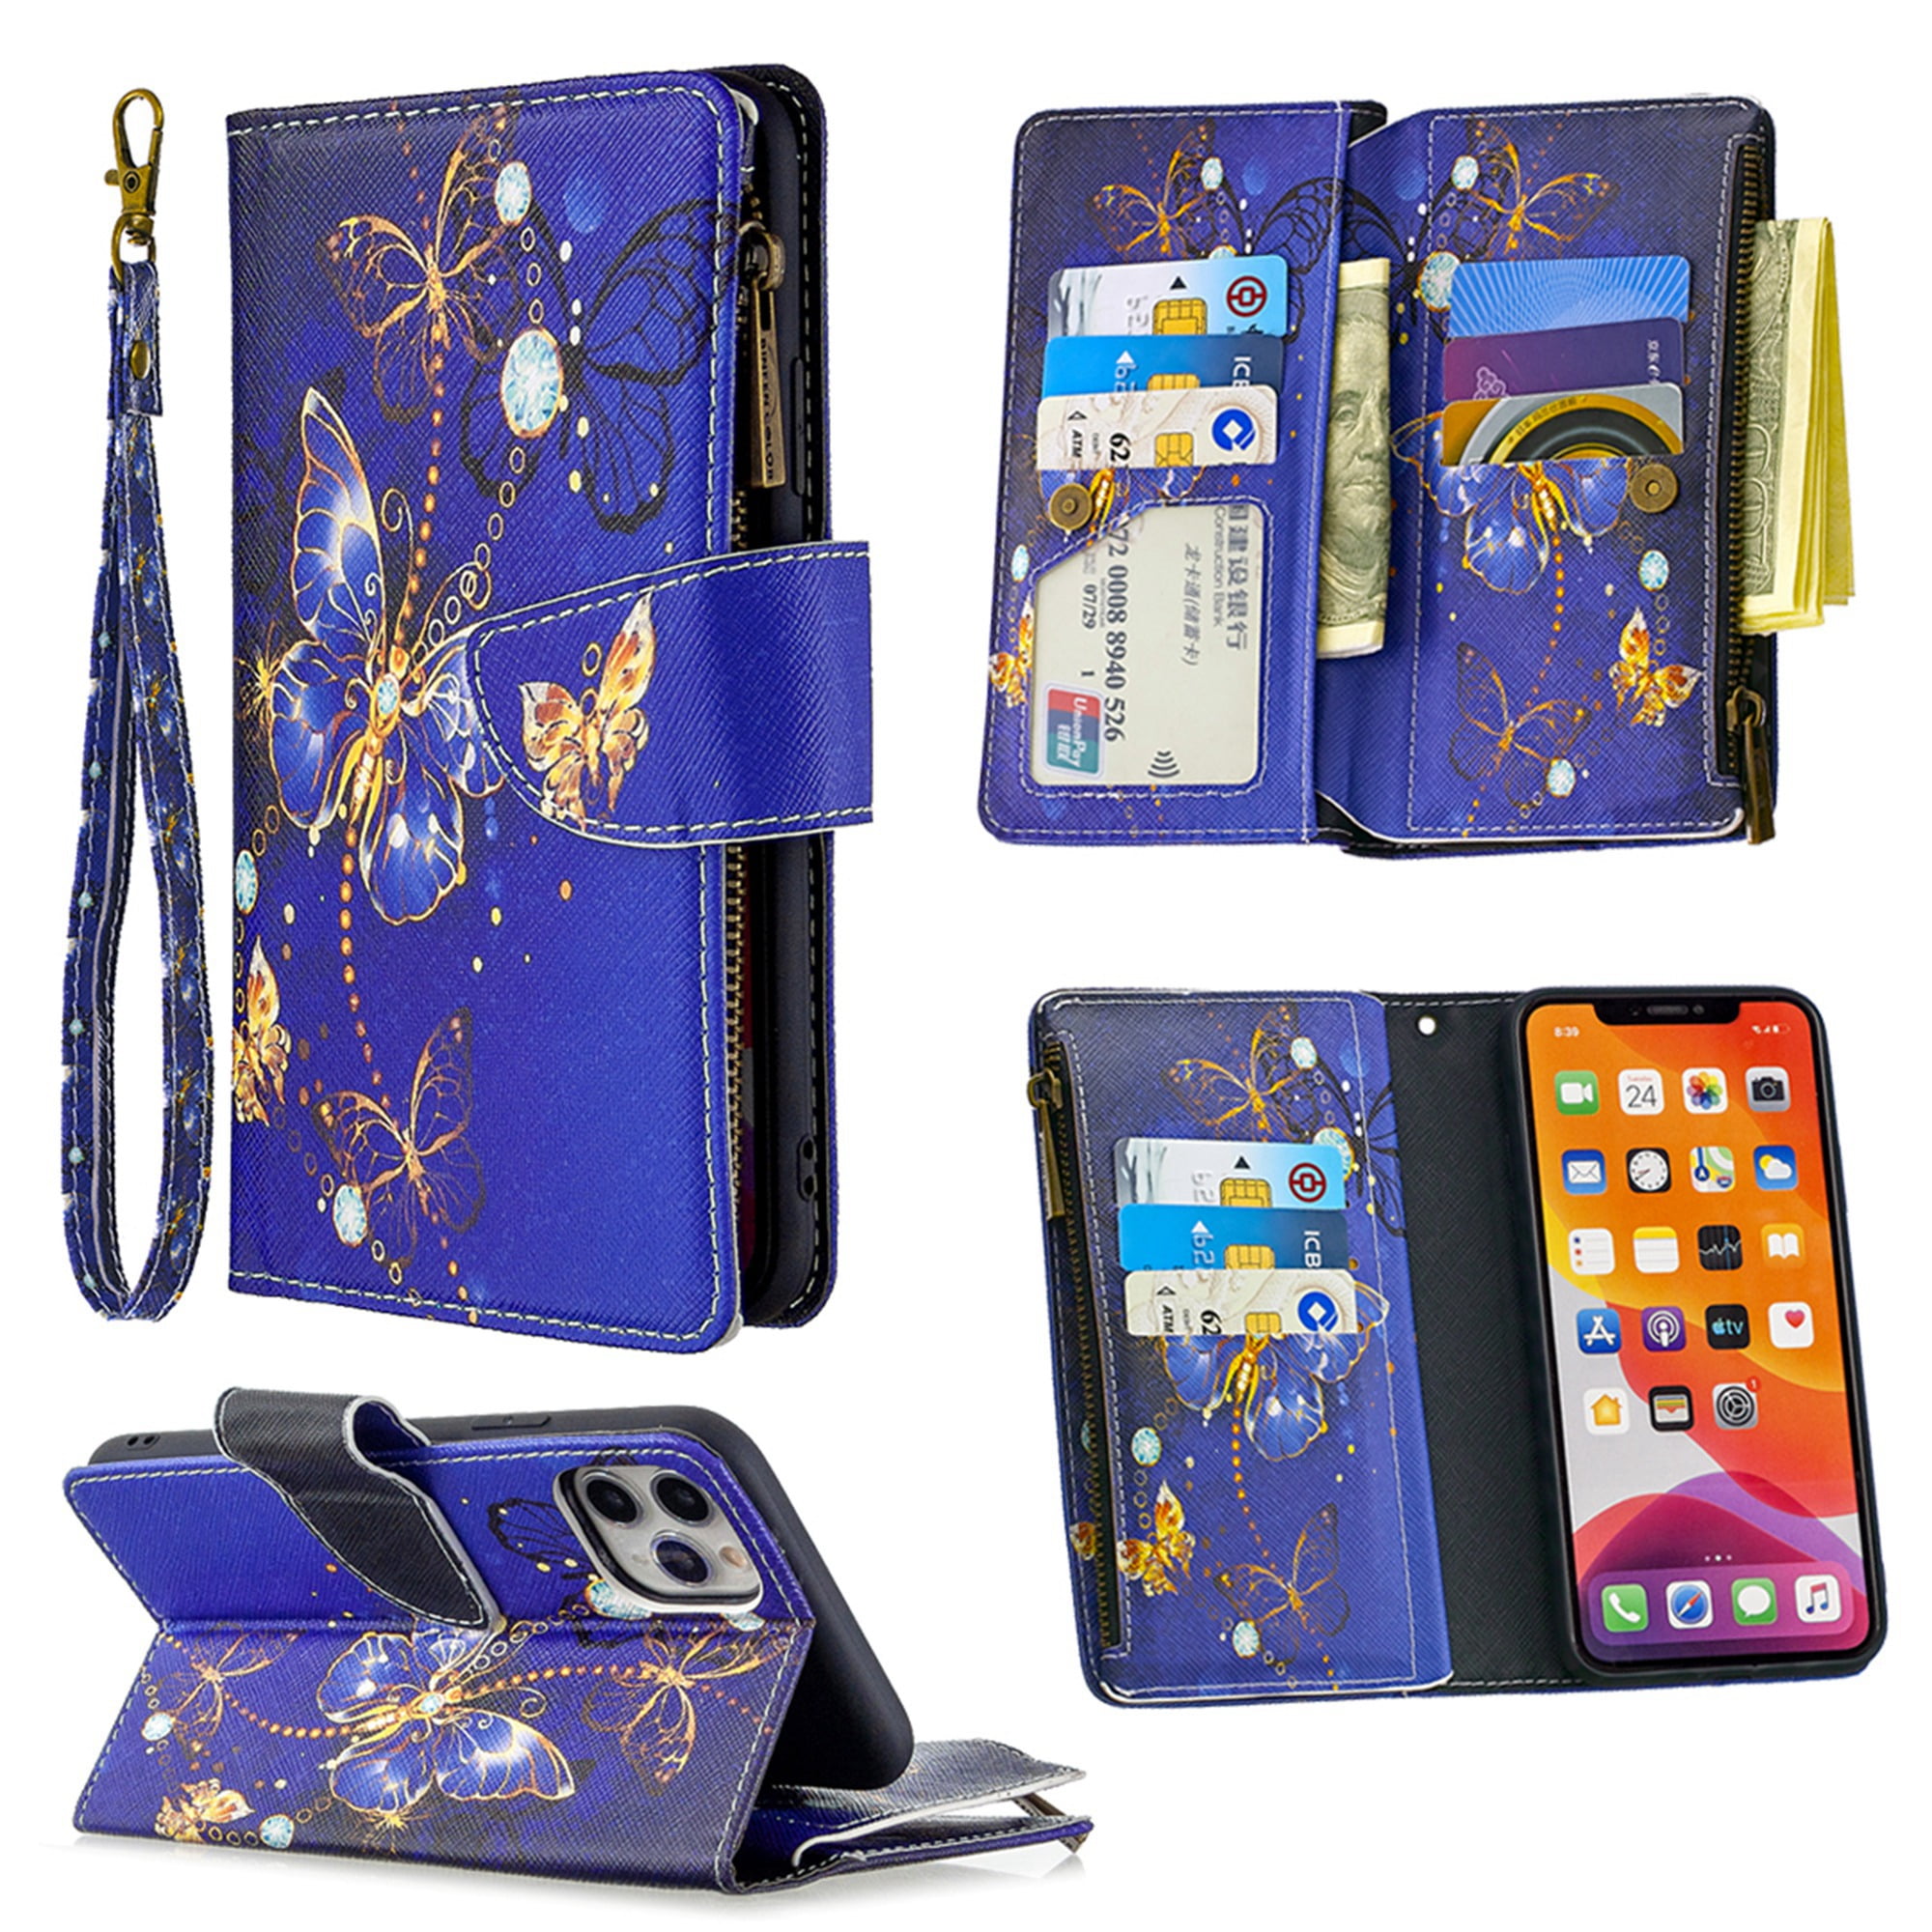 Dteck Case for Apple iPhone 12 Pro 6.1-inch,Magnetic Patterned Leather